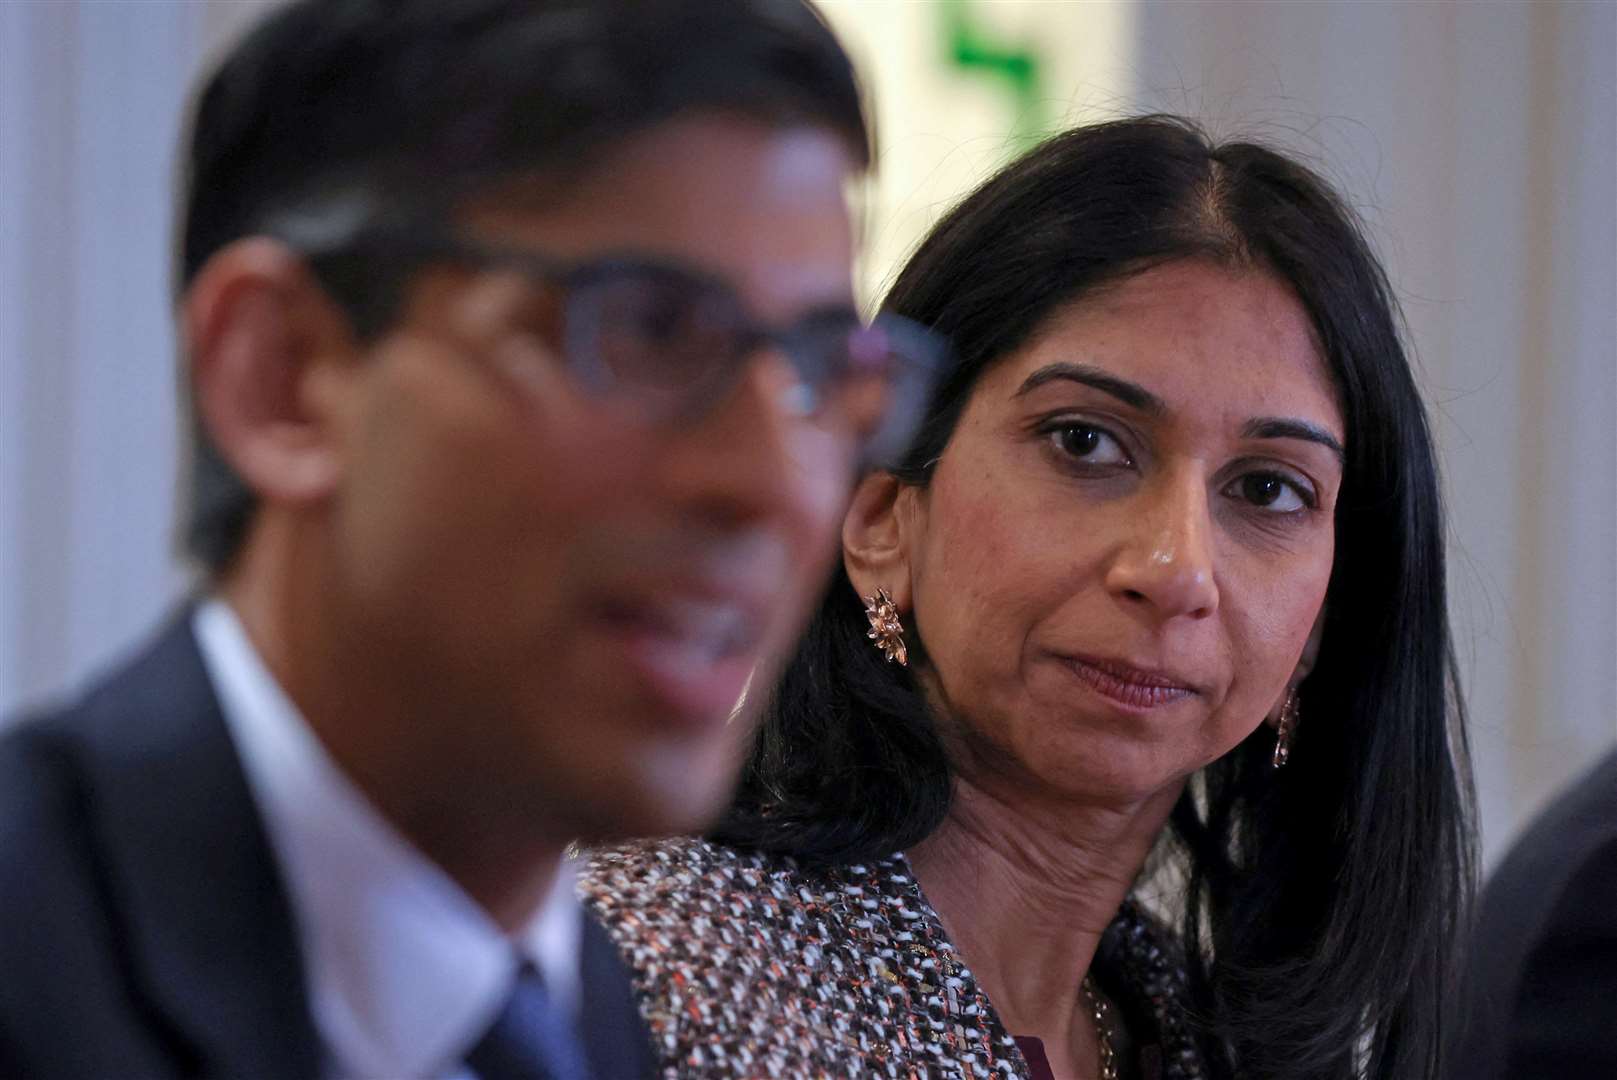 Prime Minister Rishi Sunak and Home Secretary Suella Braverman during a visit to Greater Manchester last month (Phil Noble/PA)